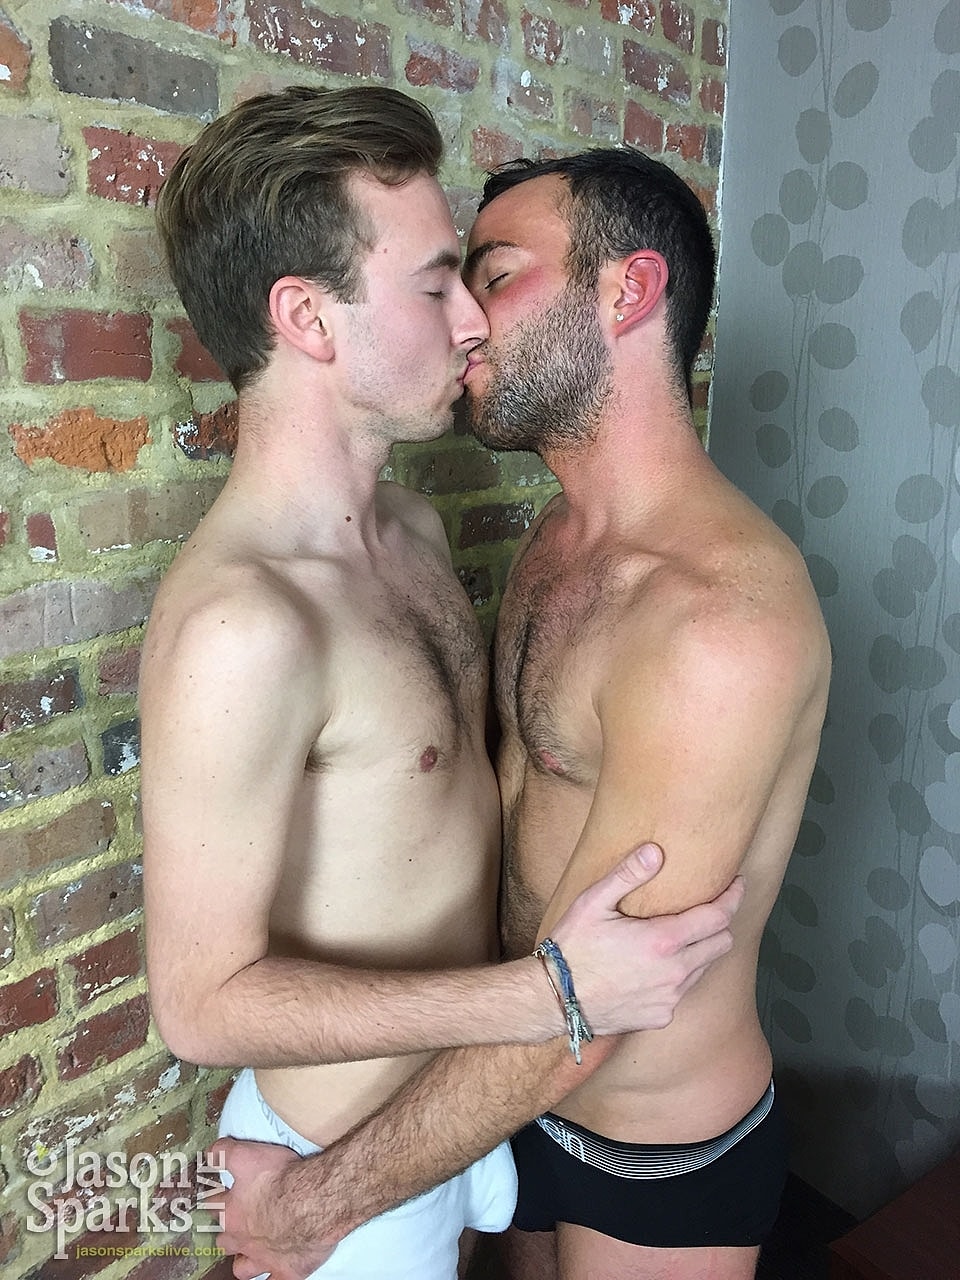 Skinny twink Pierce Blake gets his bum hole pounded by gay brunette Alex Mason  